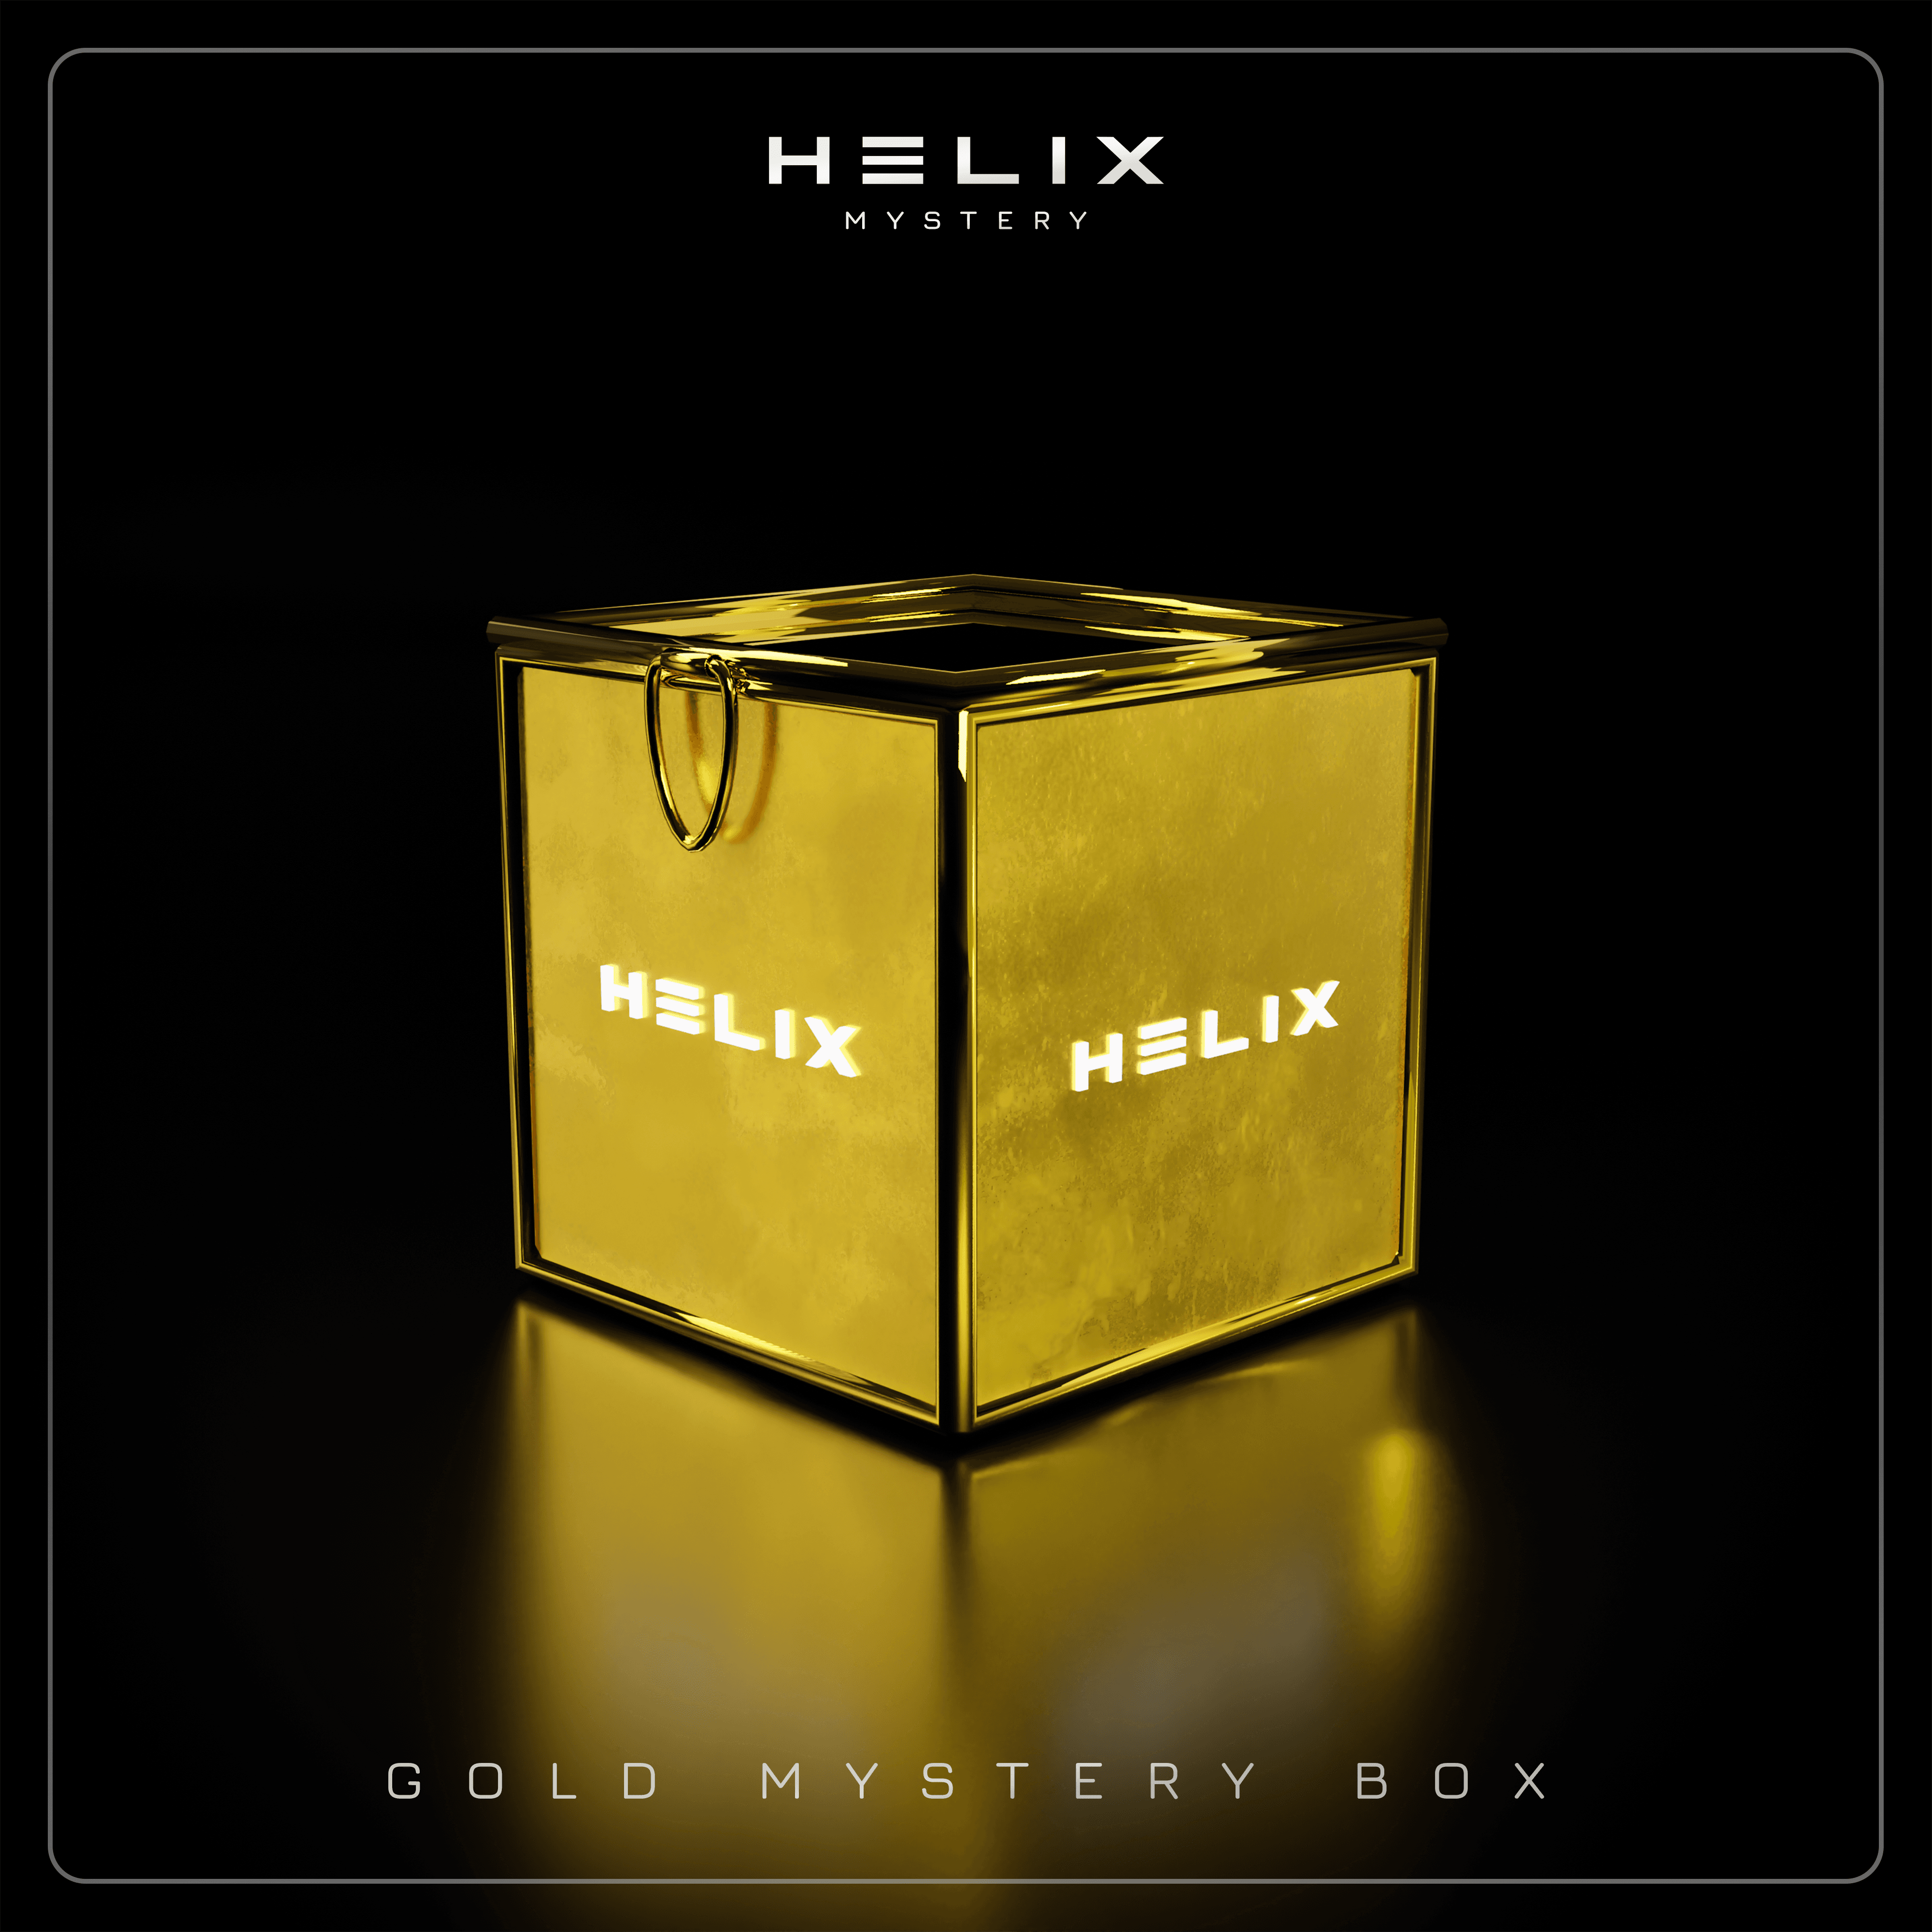 HELIX - GOLD MYSTERY BOX